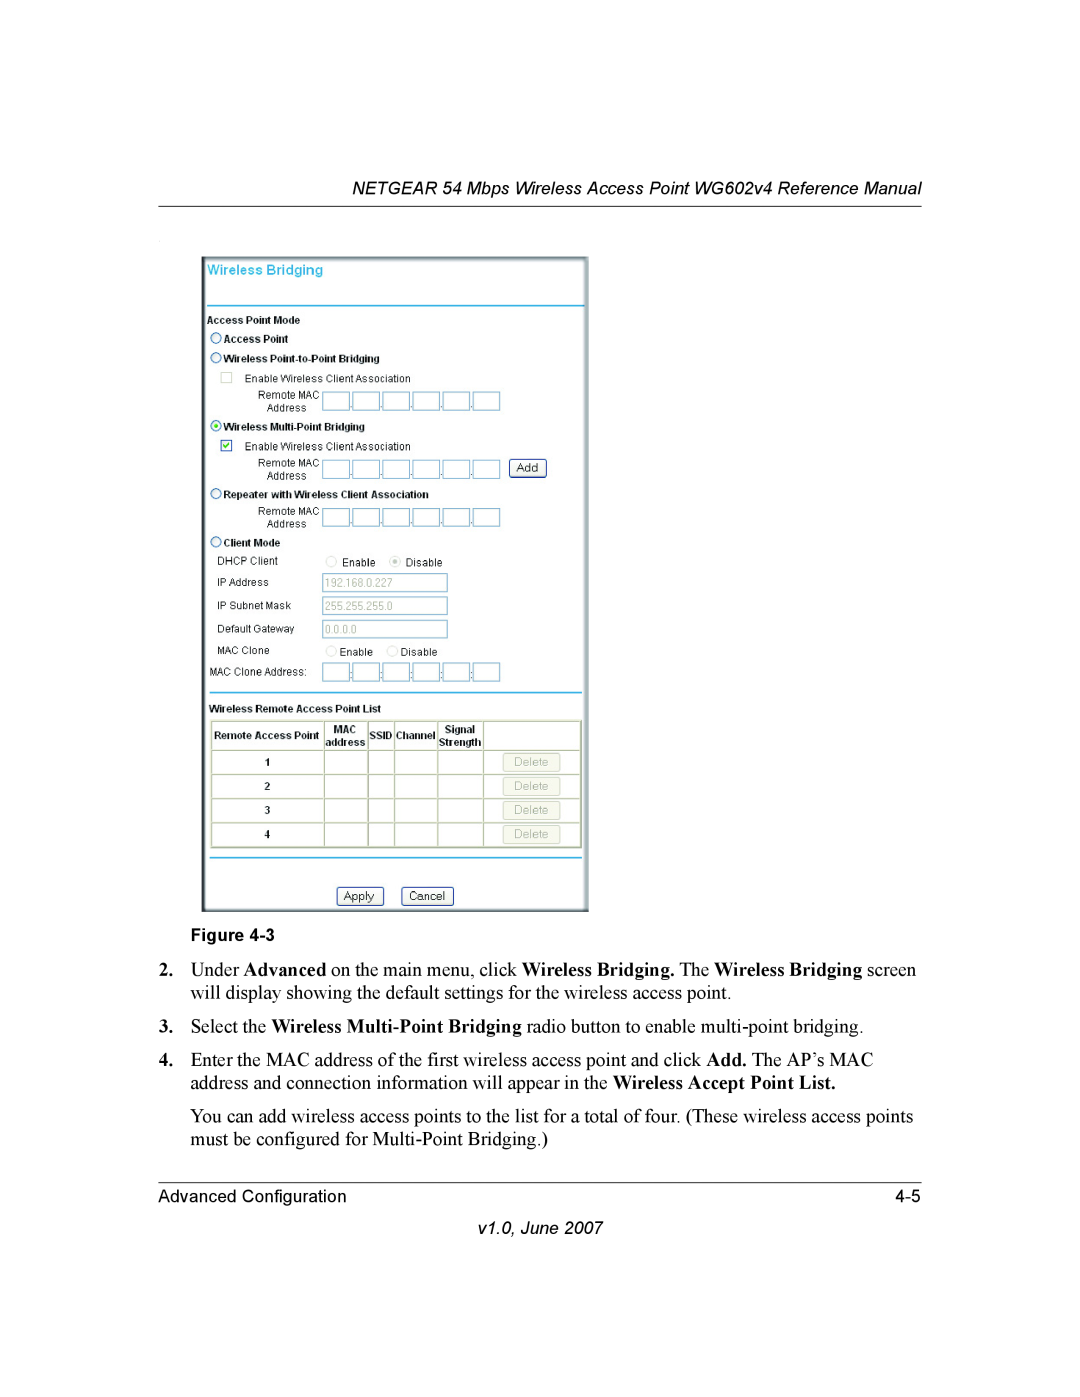 NETGEAR WG602V4 manual Select the Wireless Multi-Point Bridging radio button to enable multi-point bridging 